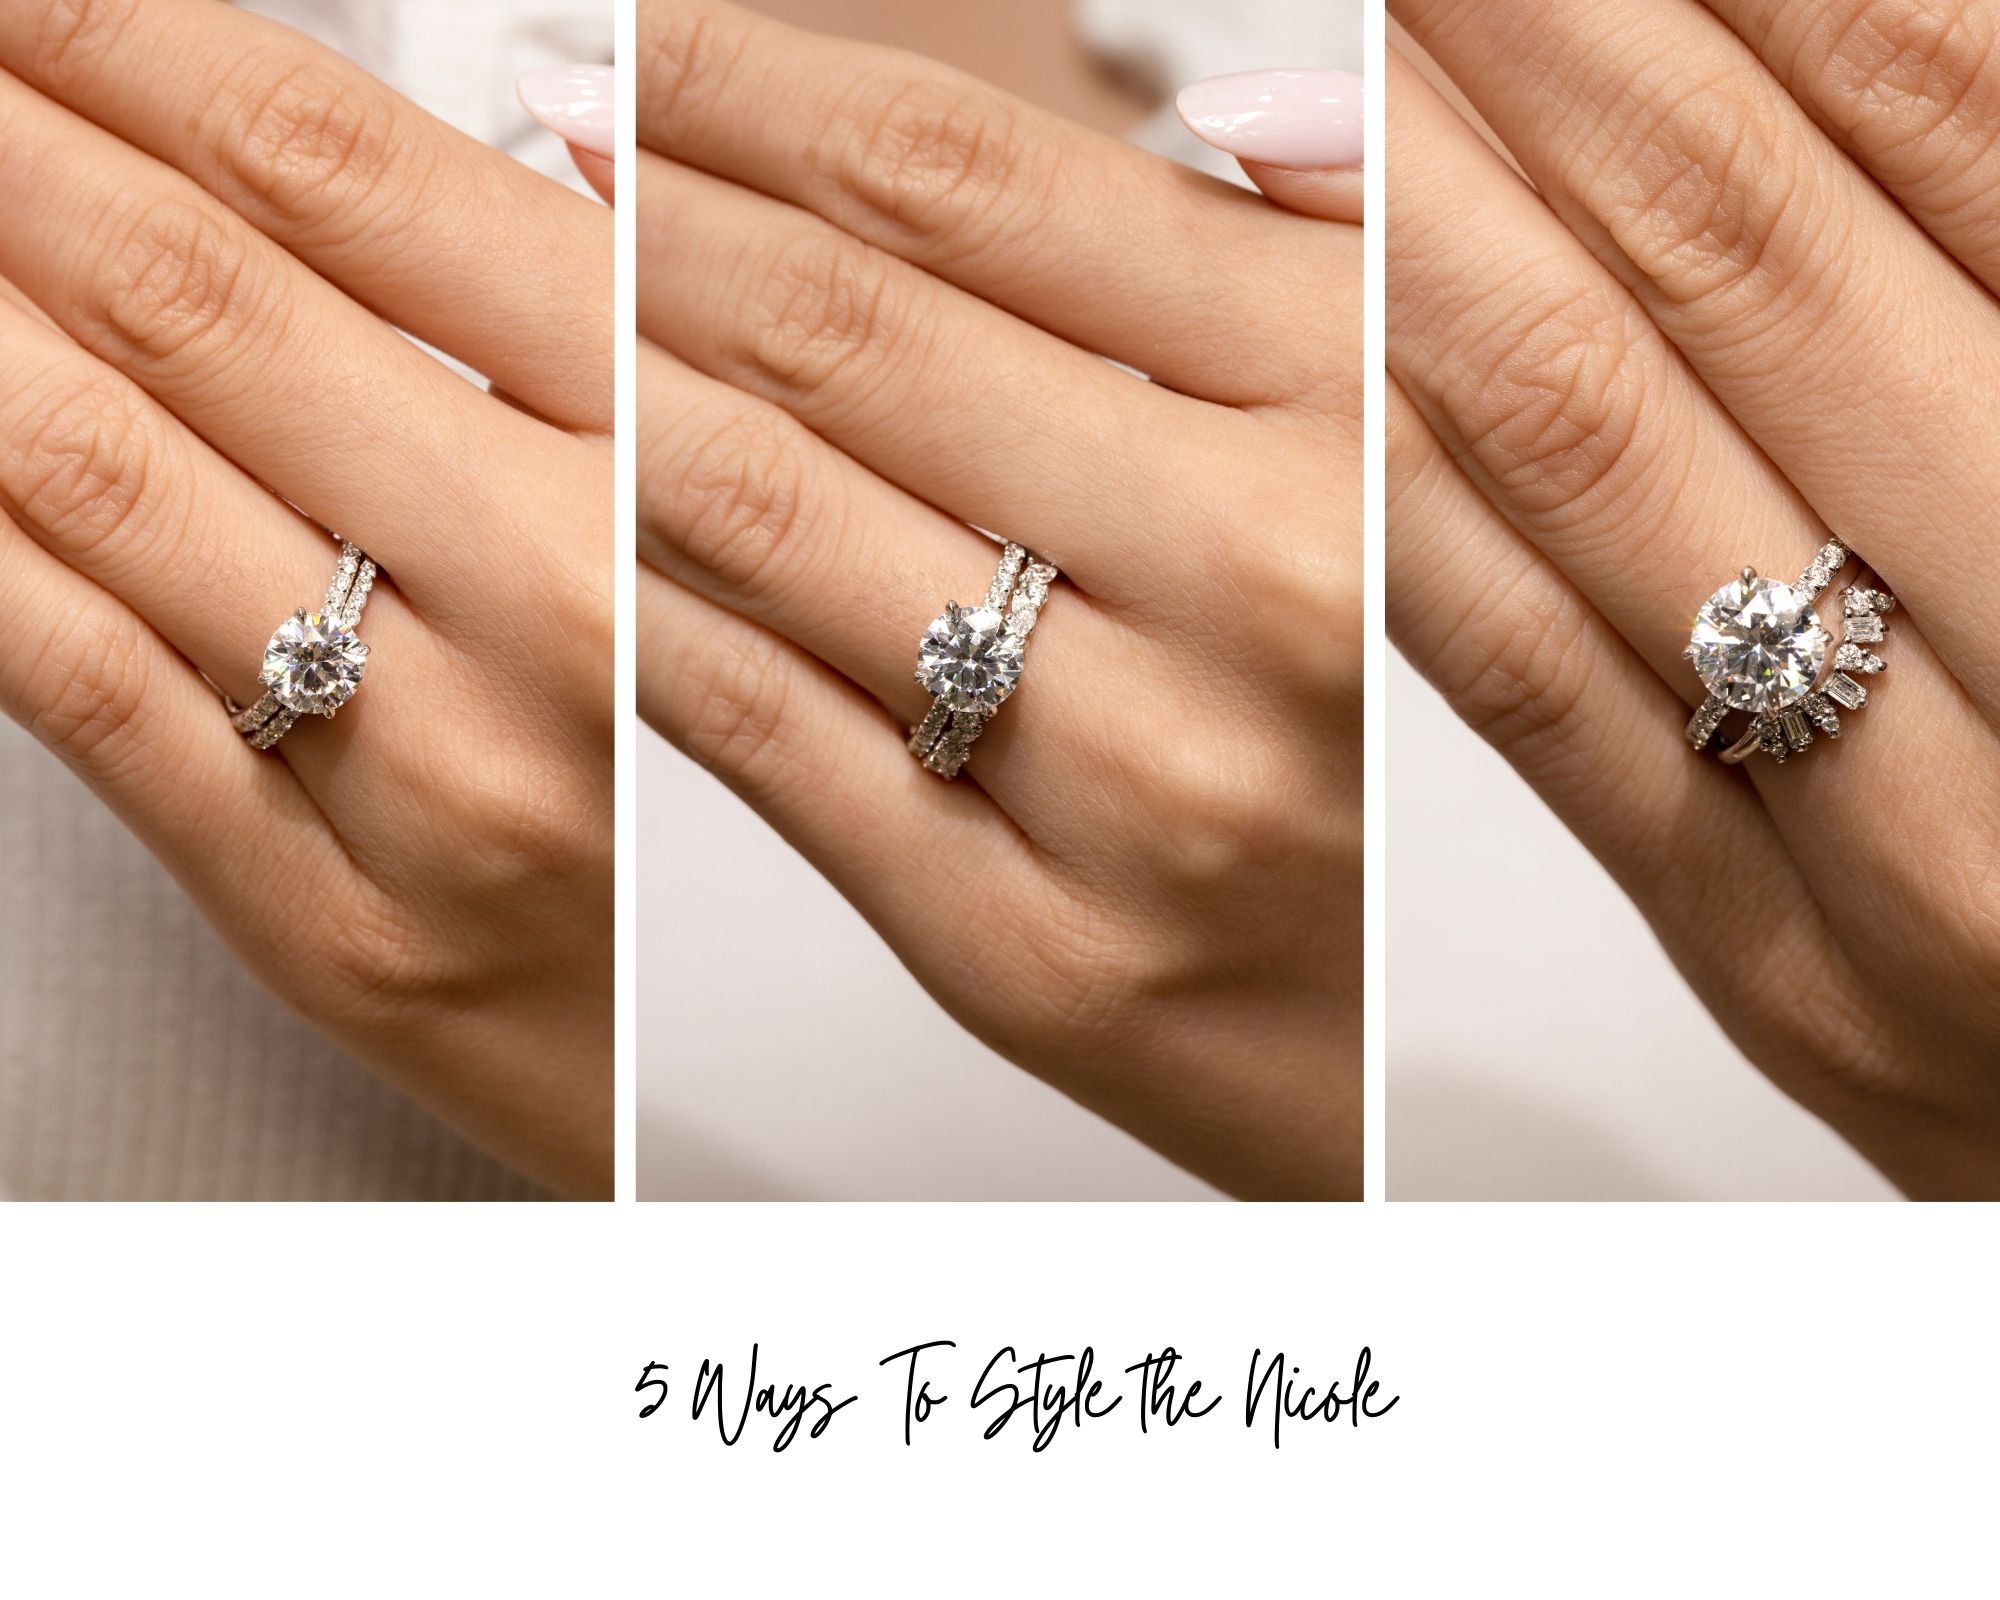 Wedding Rings vs Engagement Rings – What's the Difference? 5